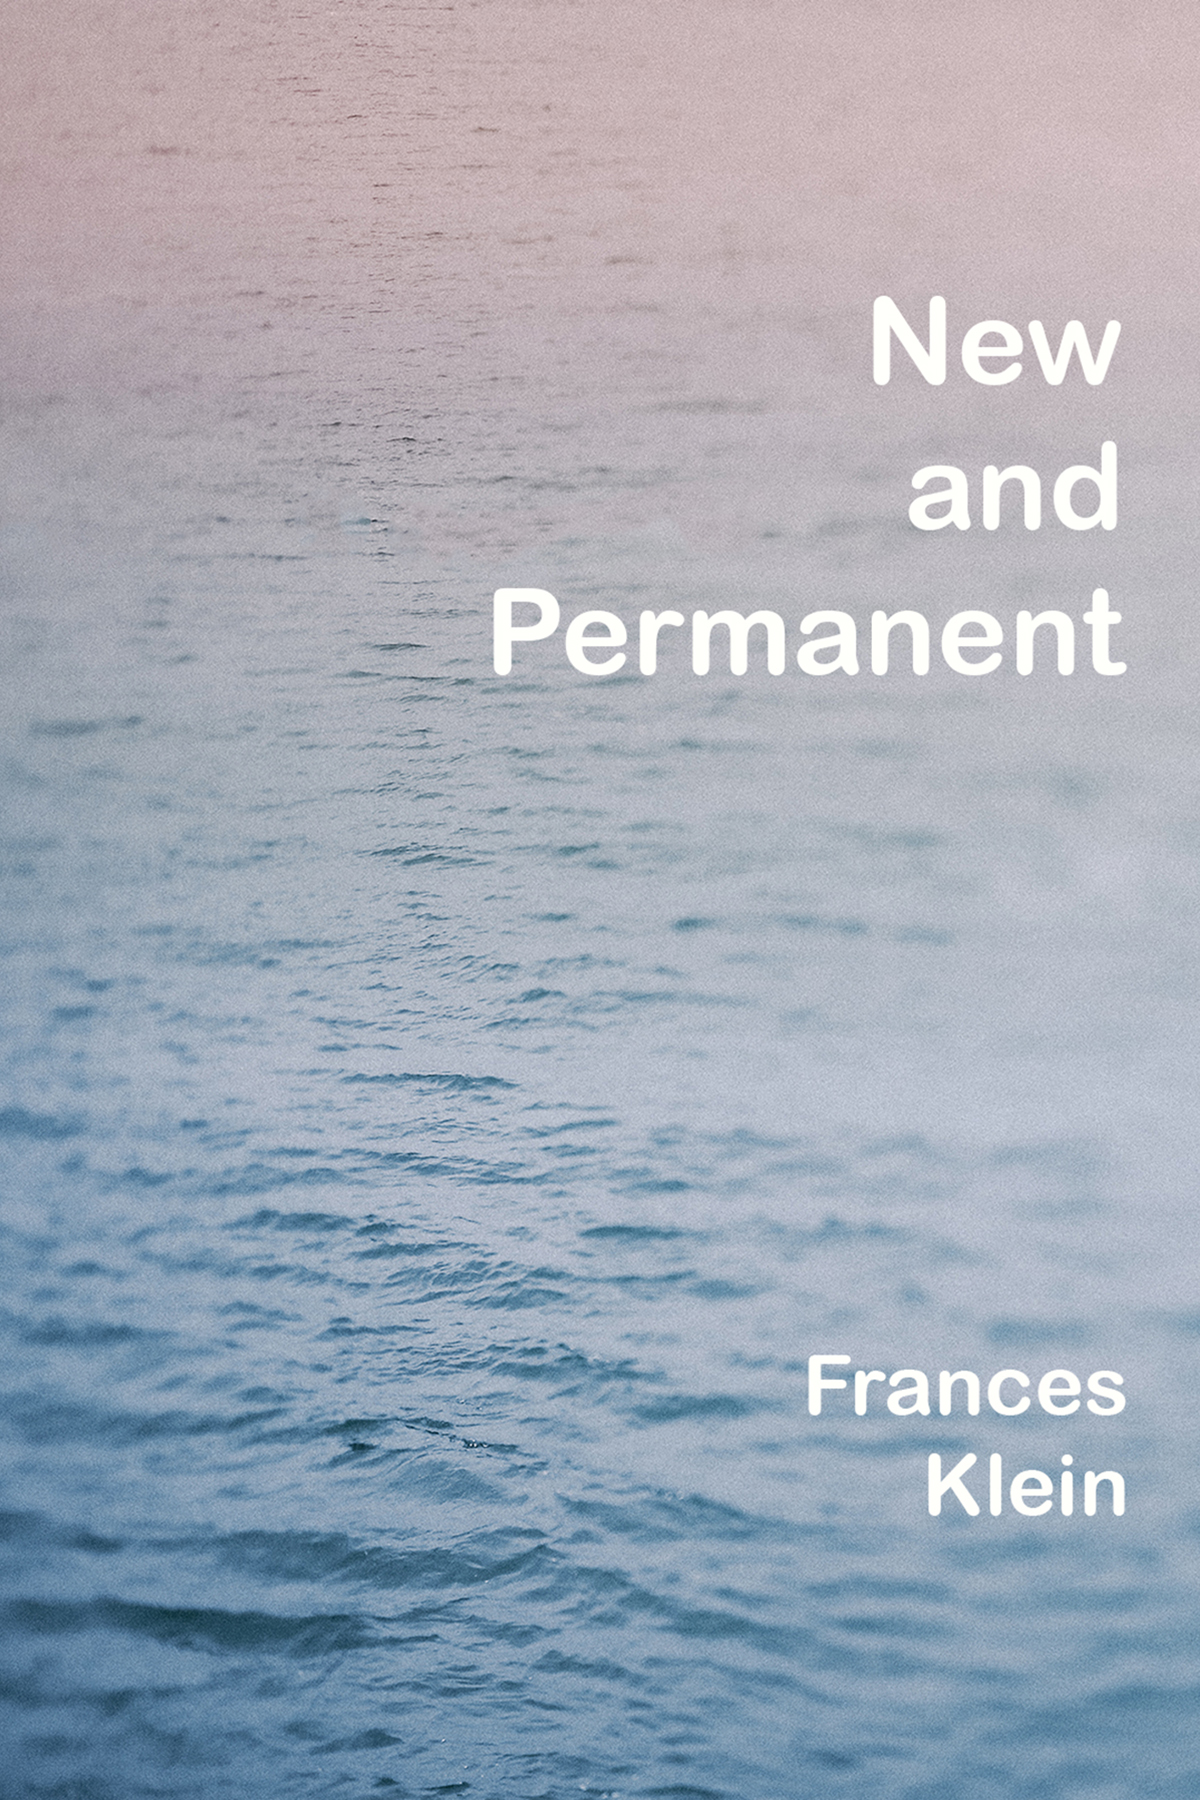 Cover for New and Permanent by Frances Klein. Ocean water at sunset with hazy edges. The title and author name are right-aligned in white font